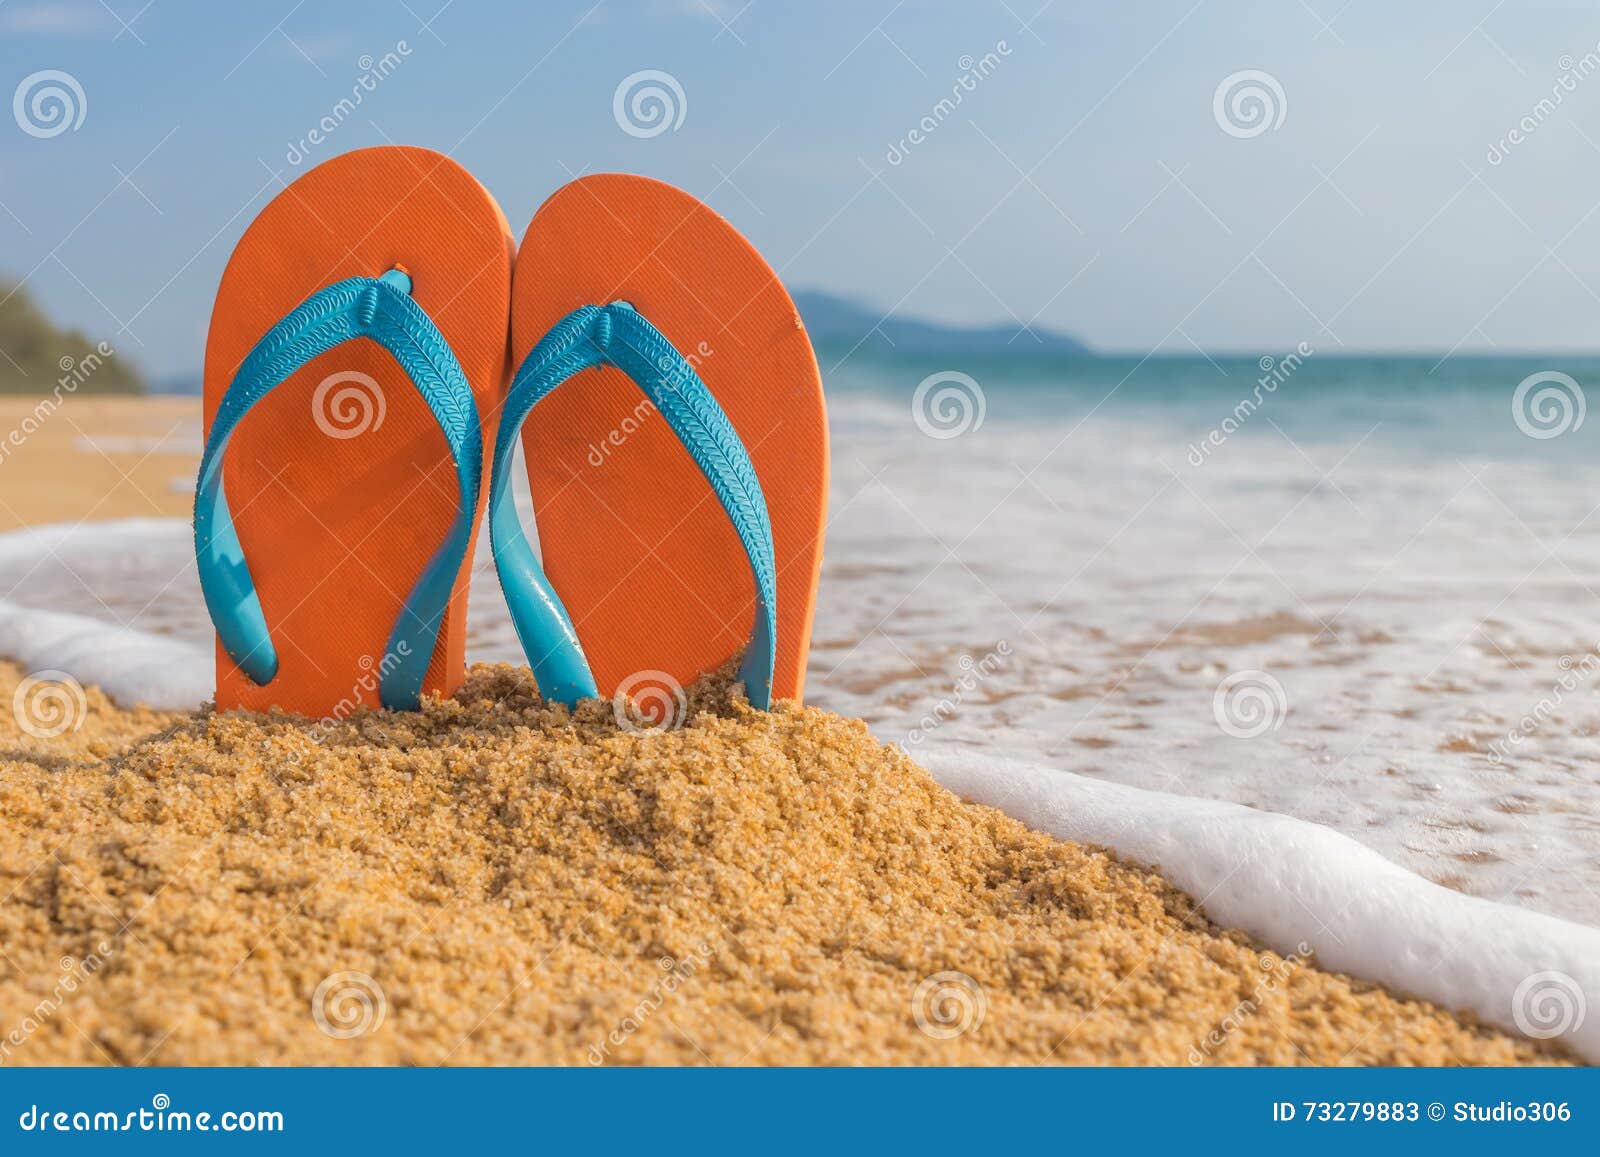 Flip-flop on the beach stock image. Image of sandals - 73279883